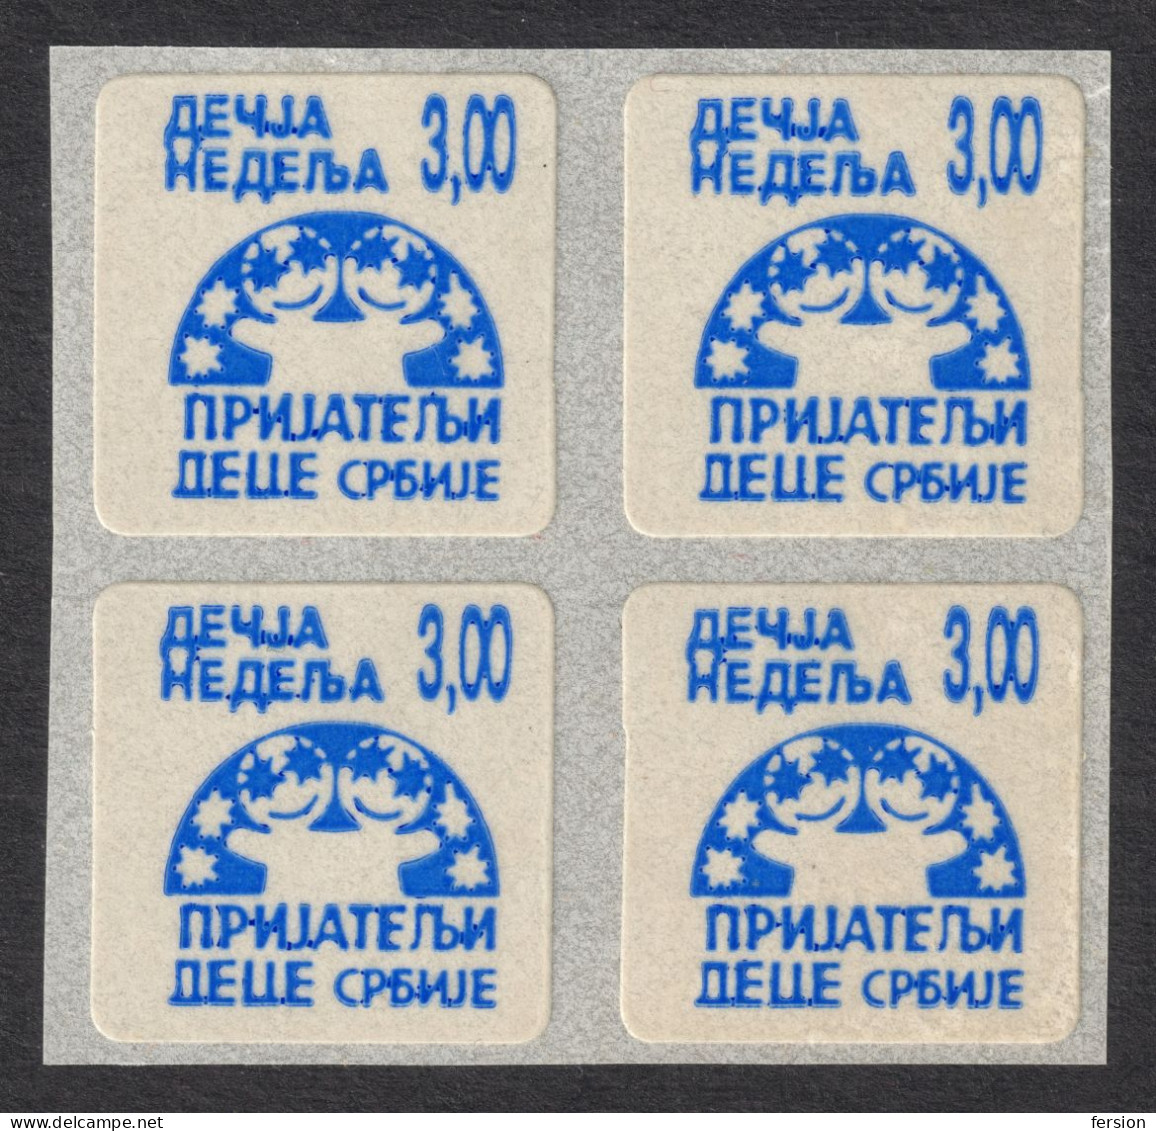 1991 Serbia Yugoslavia - Self Adhesive Charity / Additional Stamp CHILDREN WEEK - MNH - Not Used / Block Of Four - Charity Issues